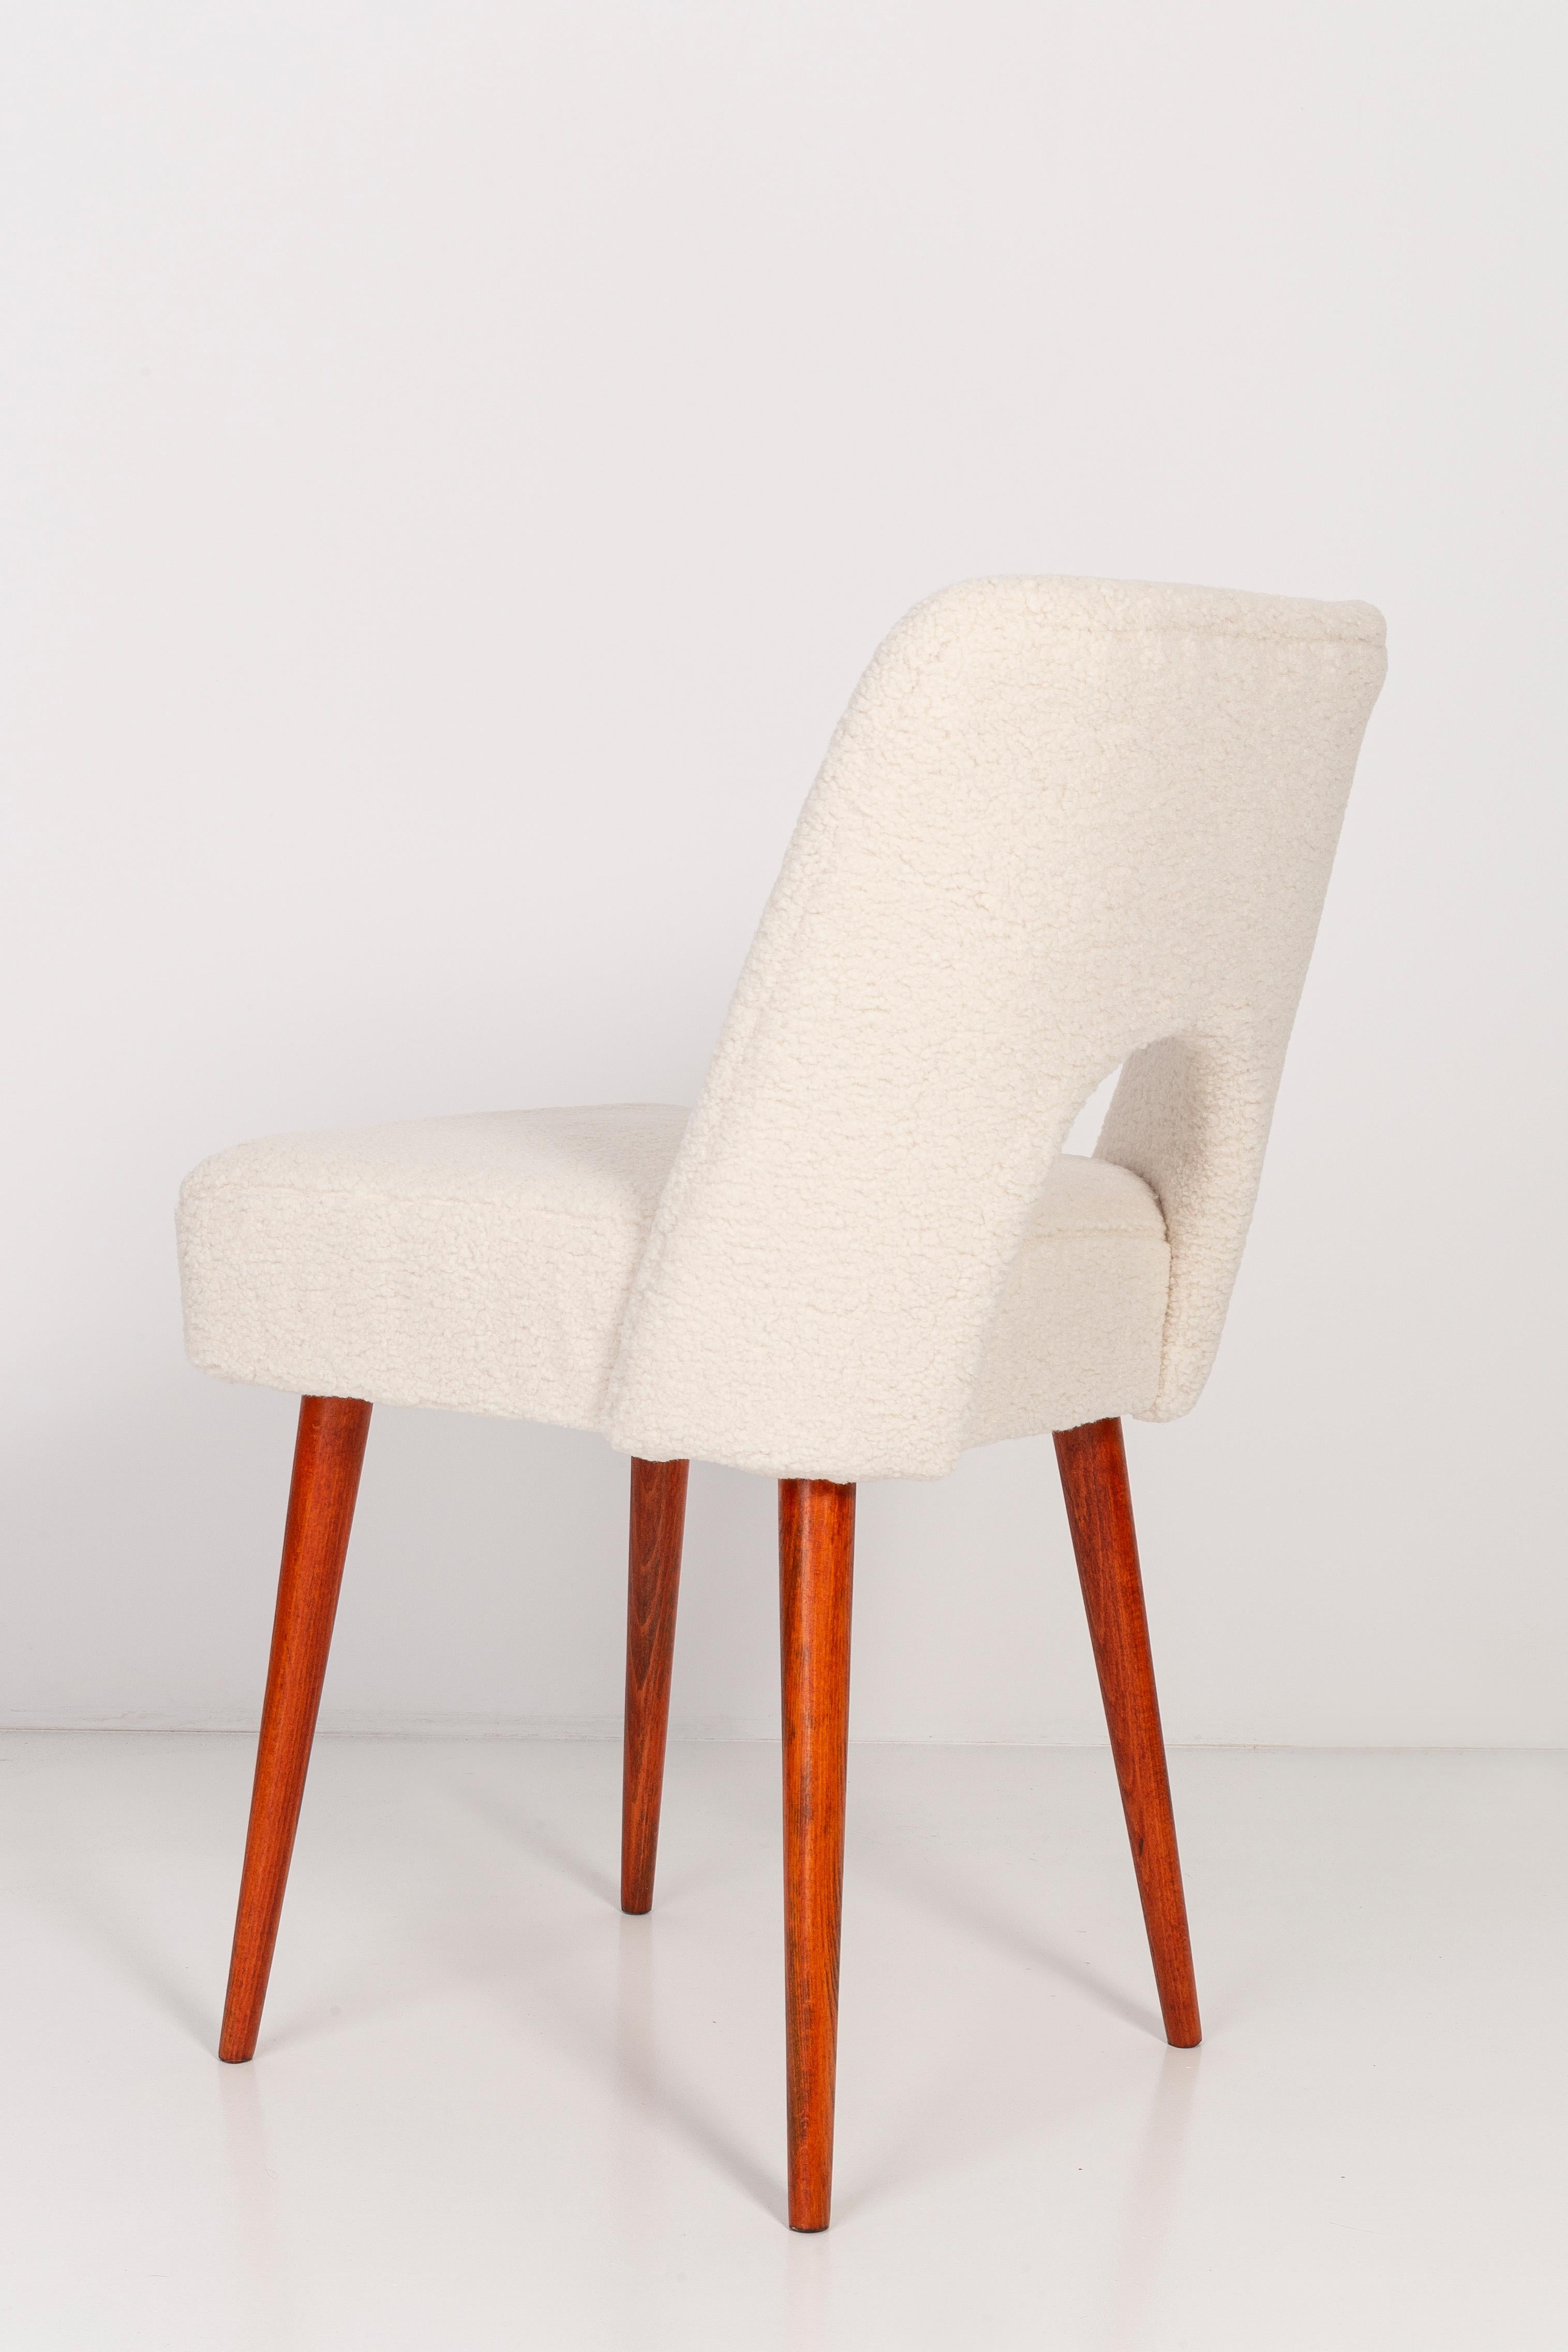 Set of Five Light Crème Boucle 'Shell' Chairs, 1960s For Sale 2